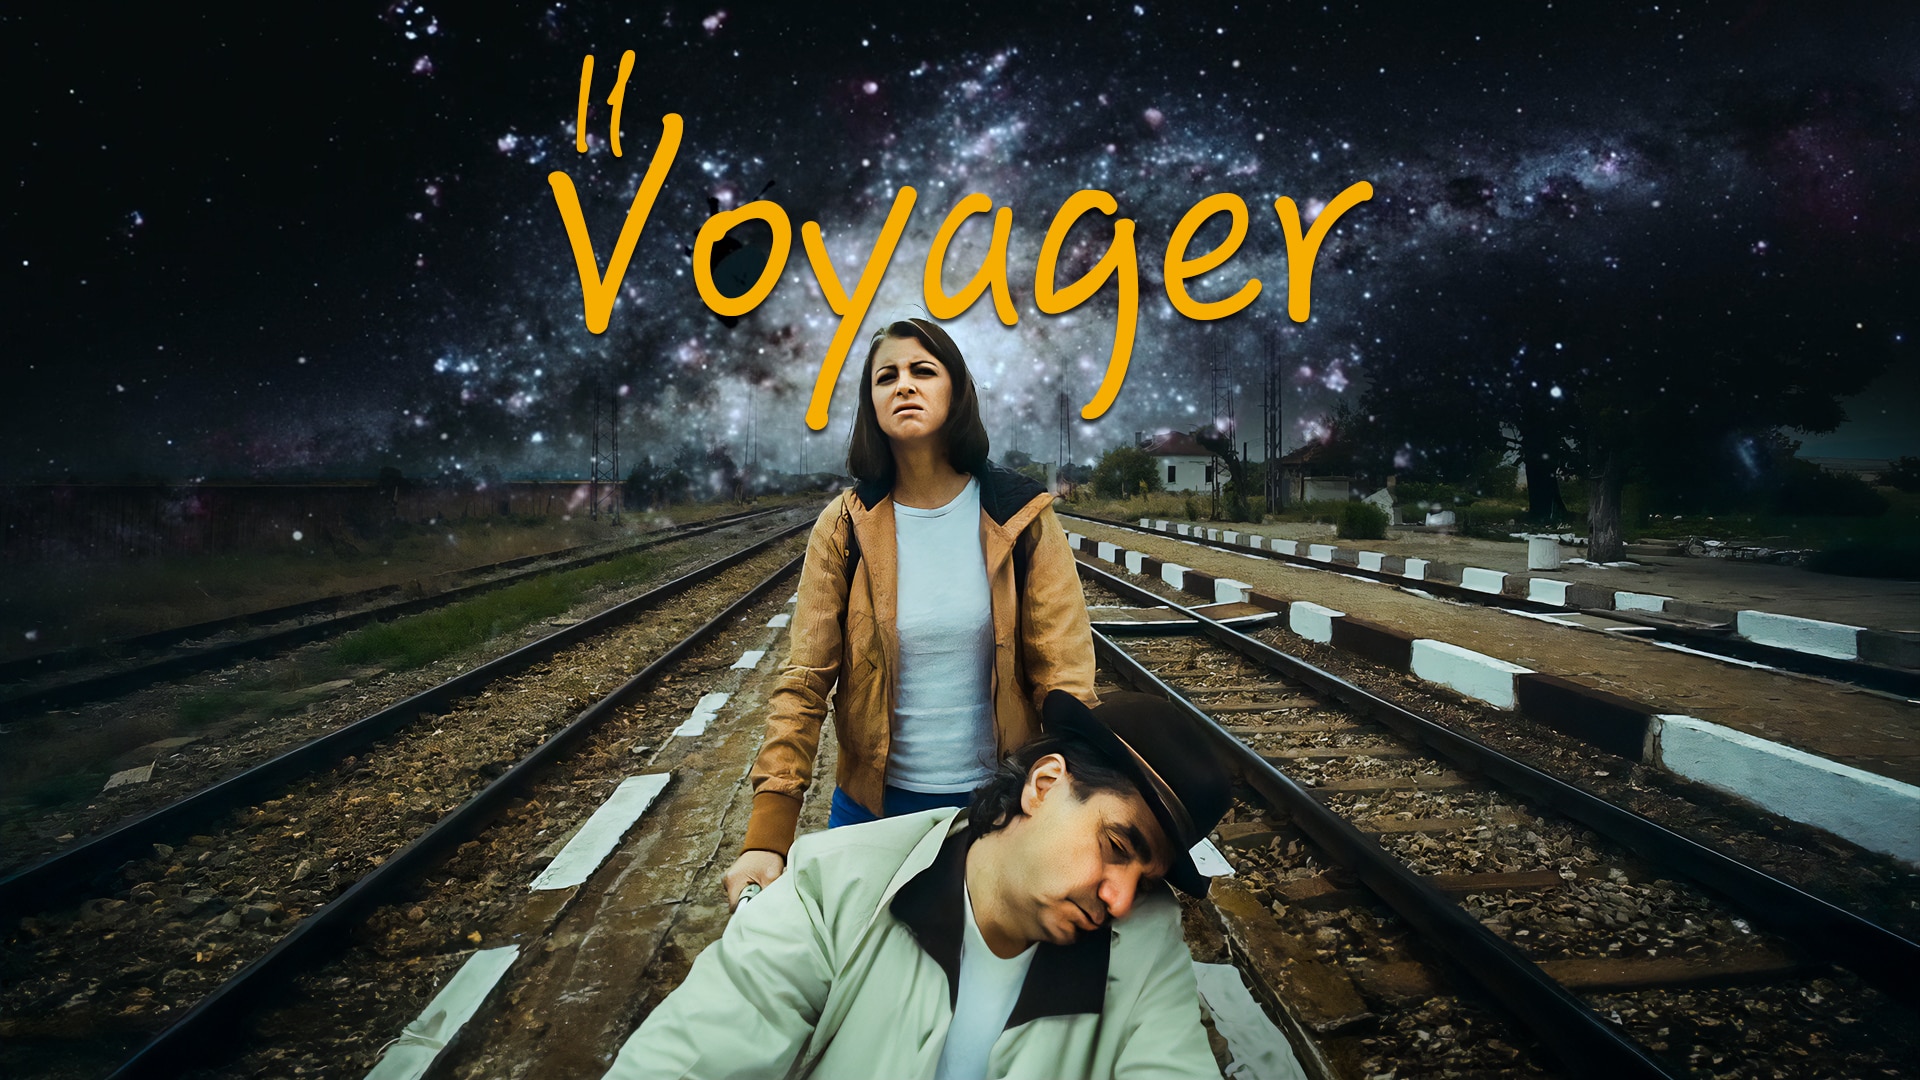 Il Voyager